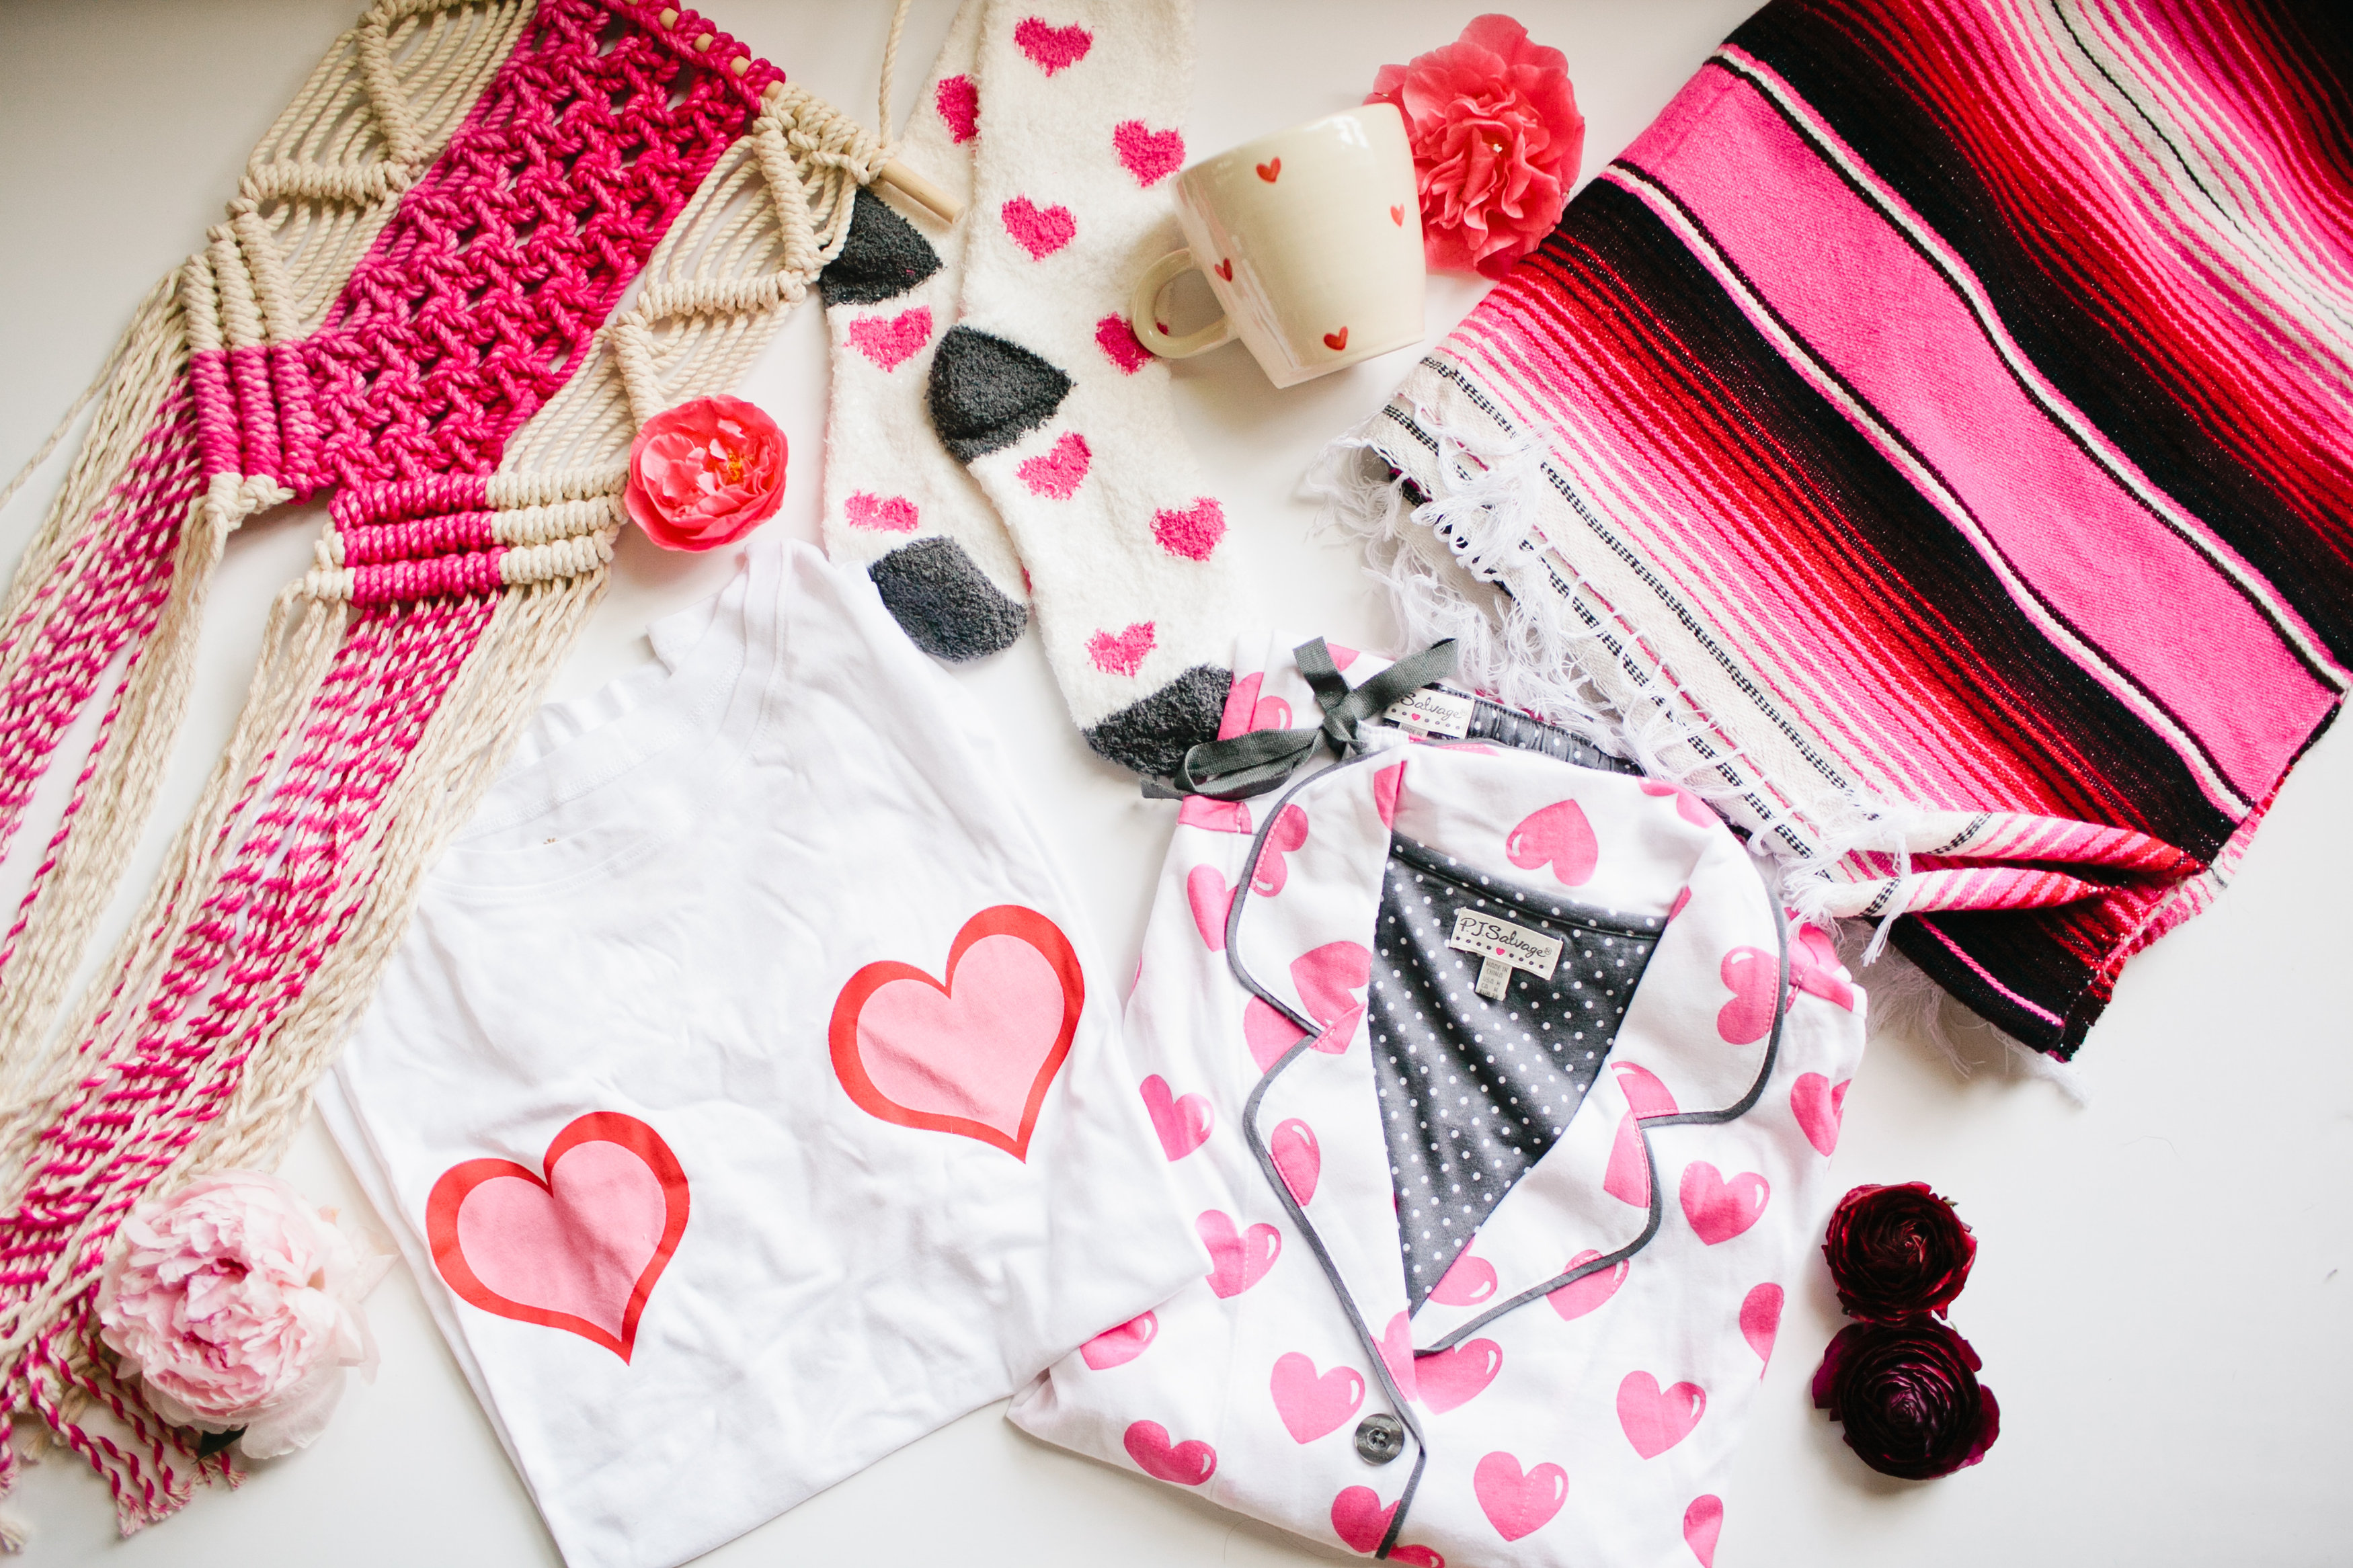 Getting Cozy on Valentine’s Day with PJ Salvage + a Giveaway